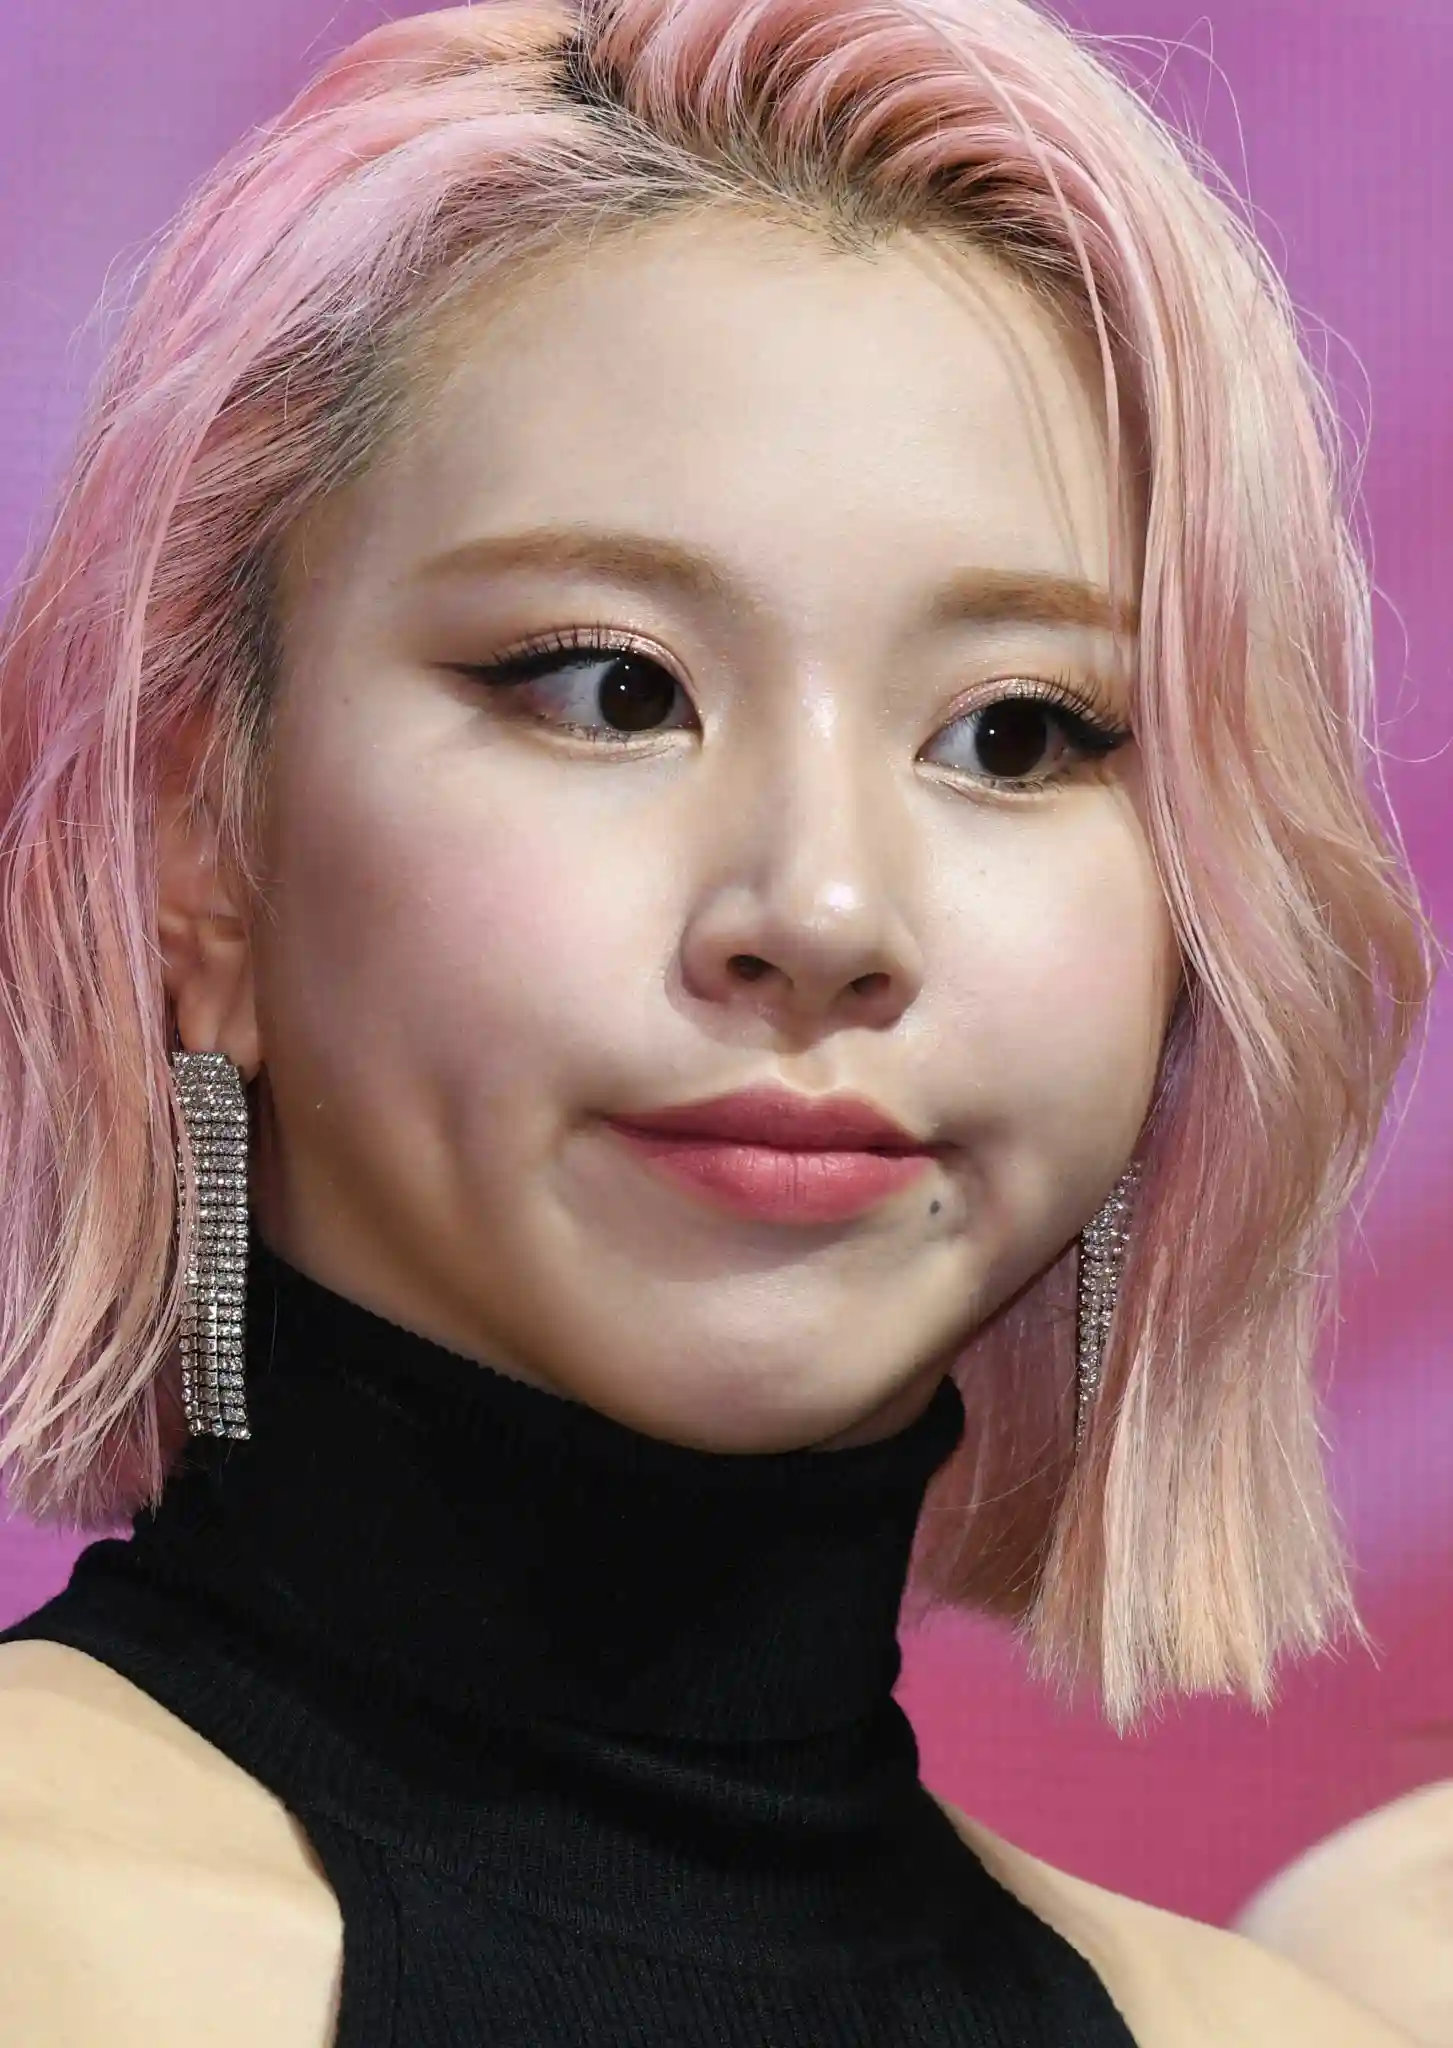 Son Chae-young known mononymously as Chaeyoung of TWICE